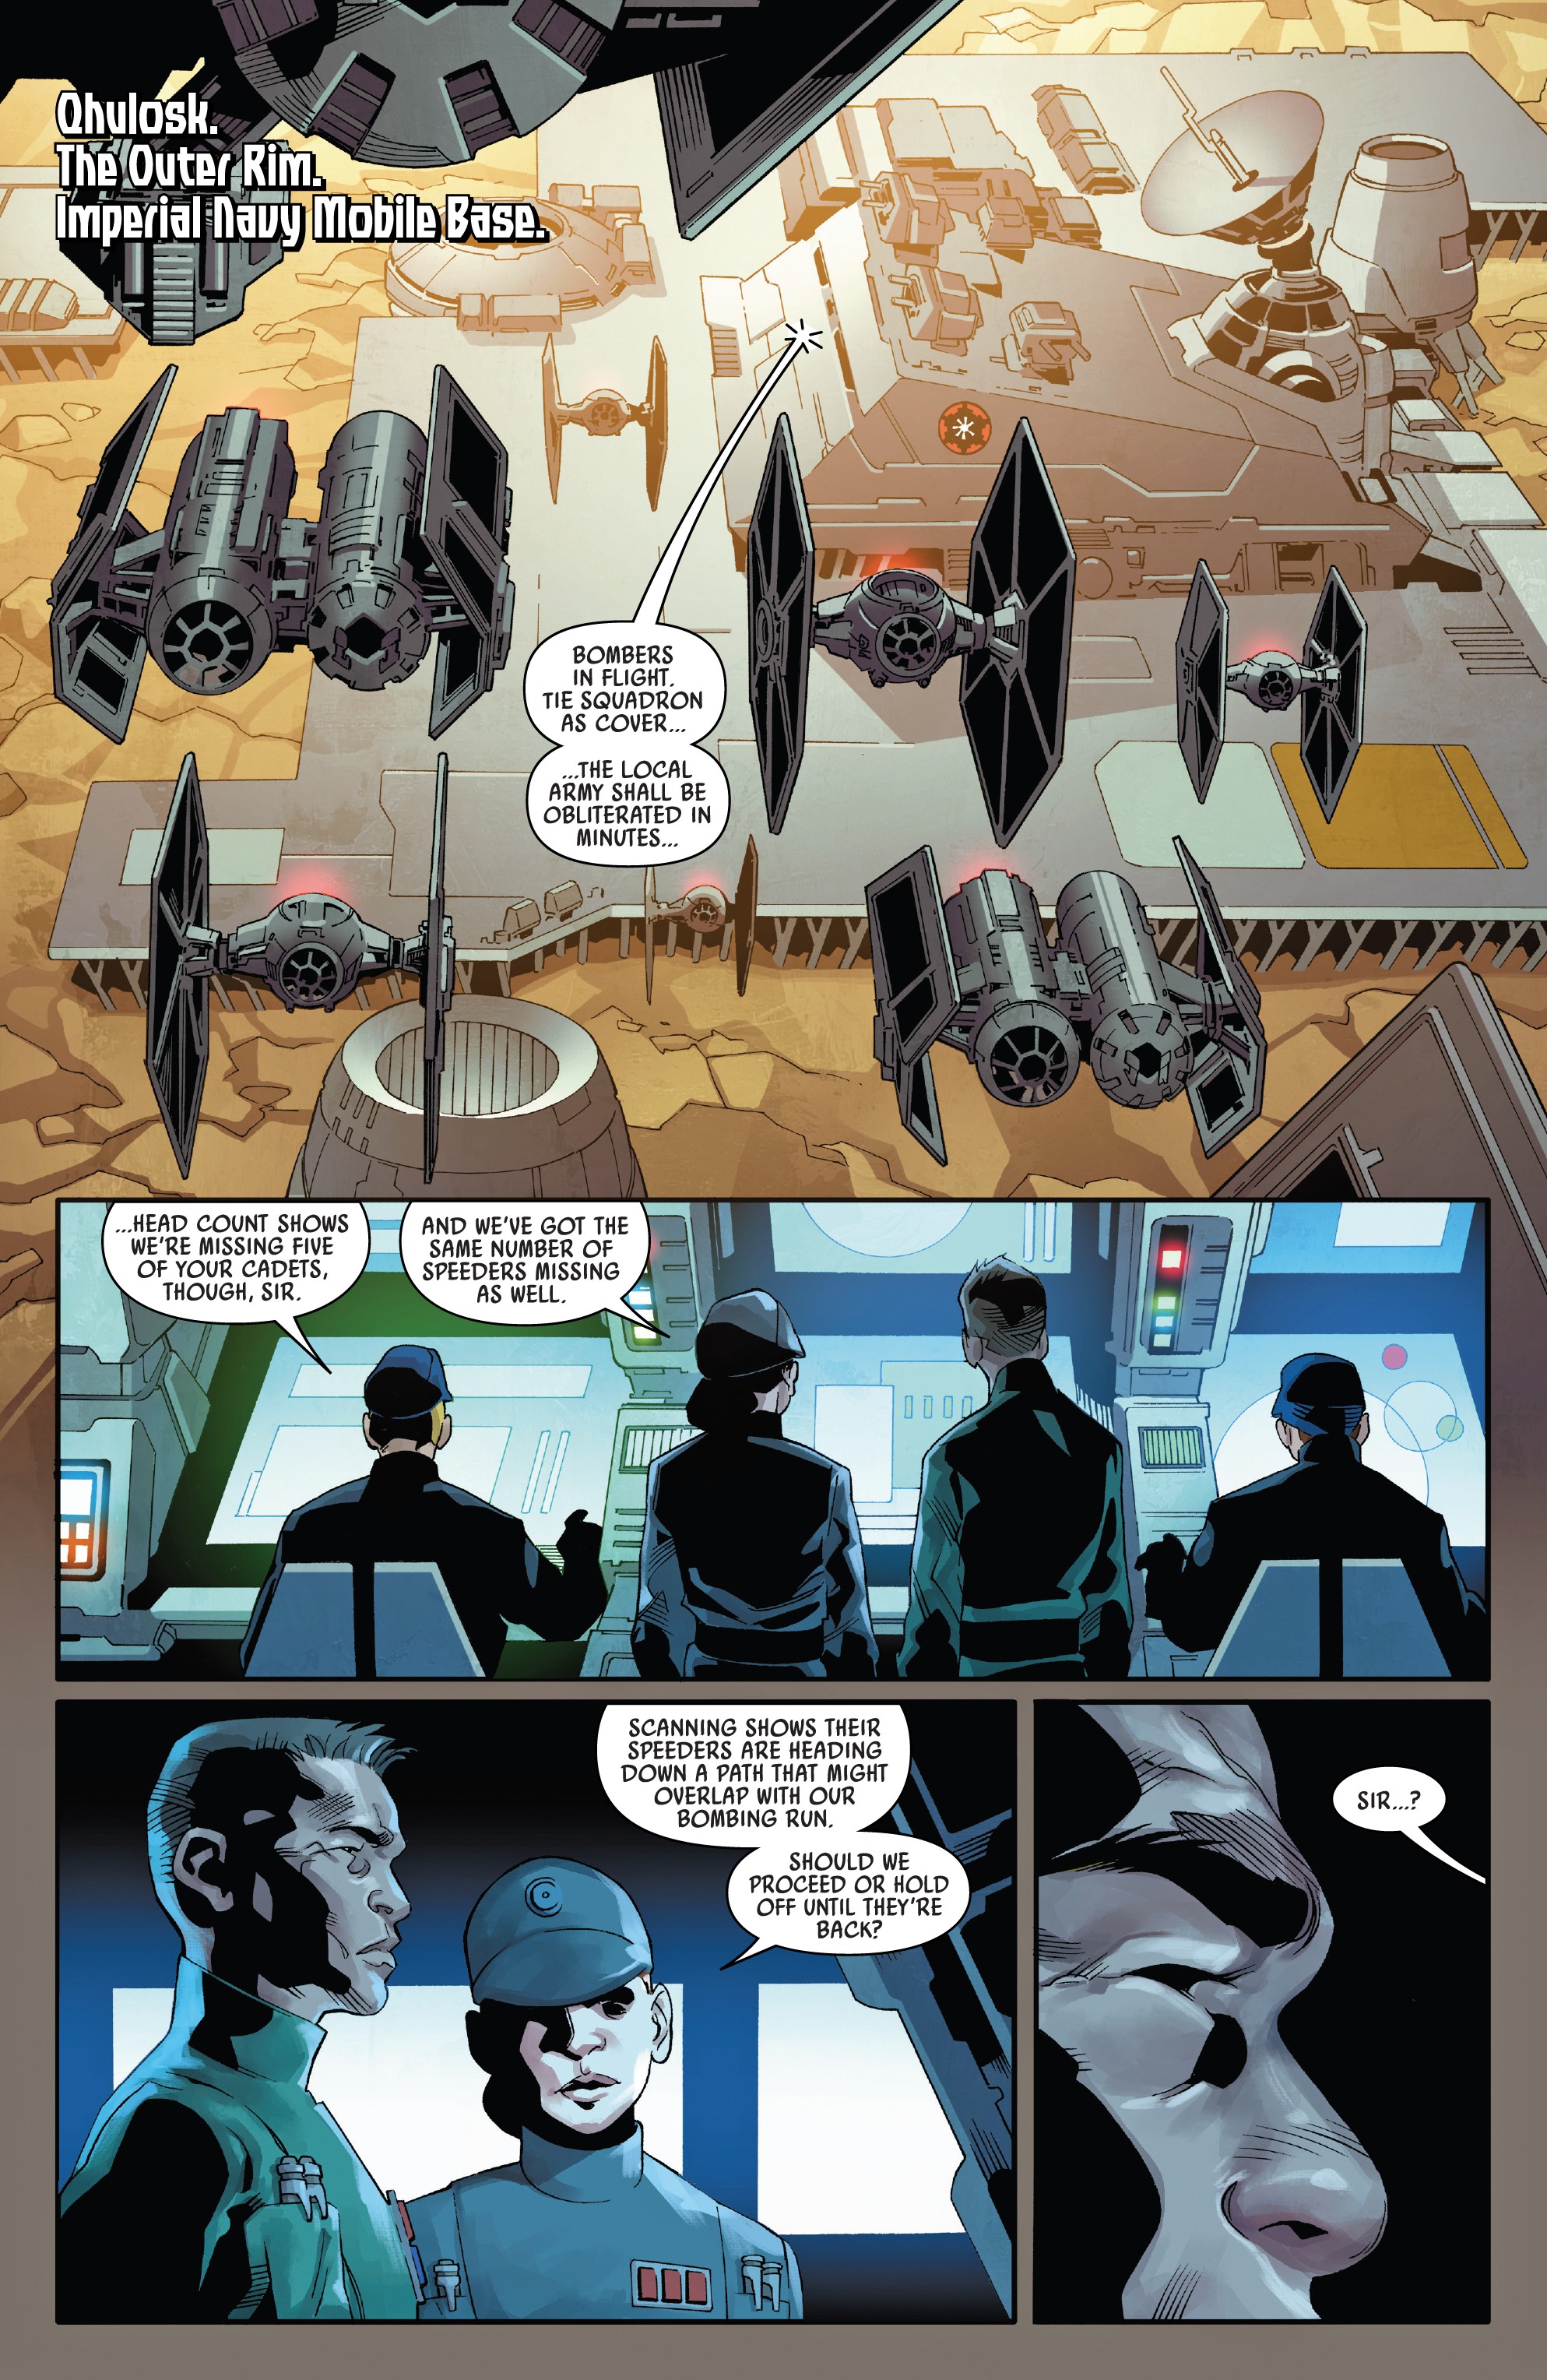 Star Wars: Han Solo - Imperial Cadet (2018-): Chapter 5 - Page 3